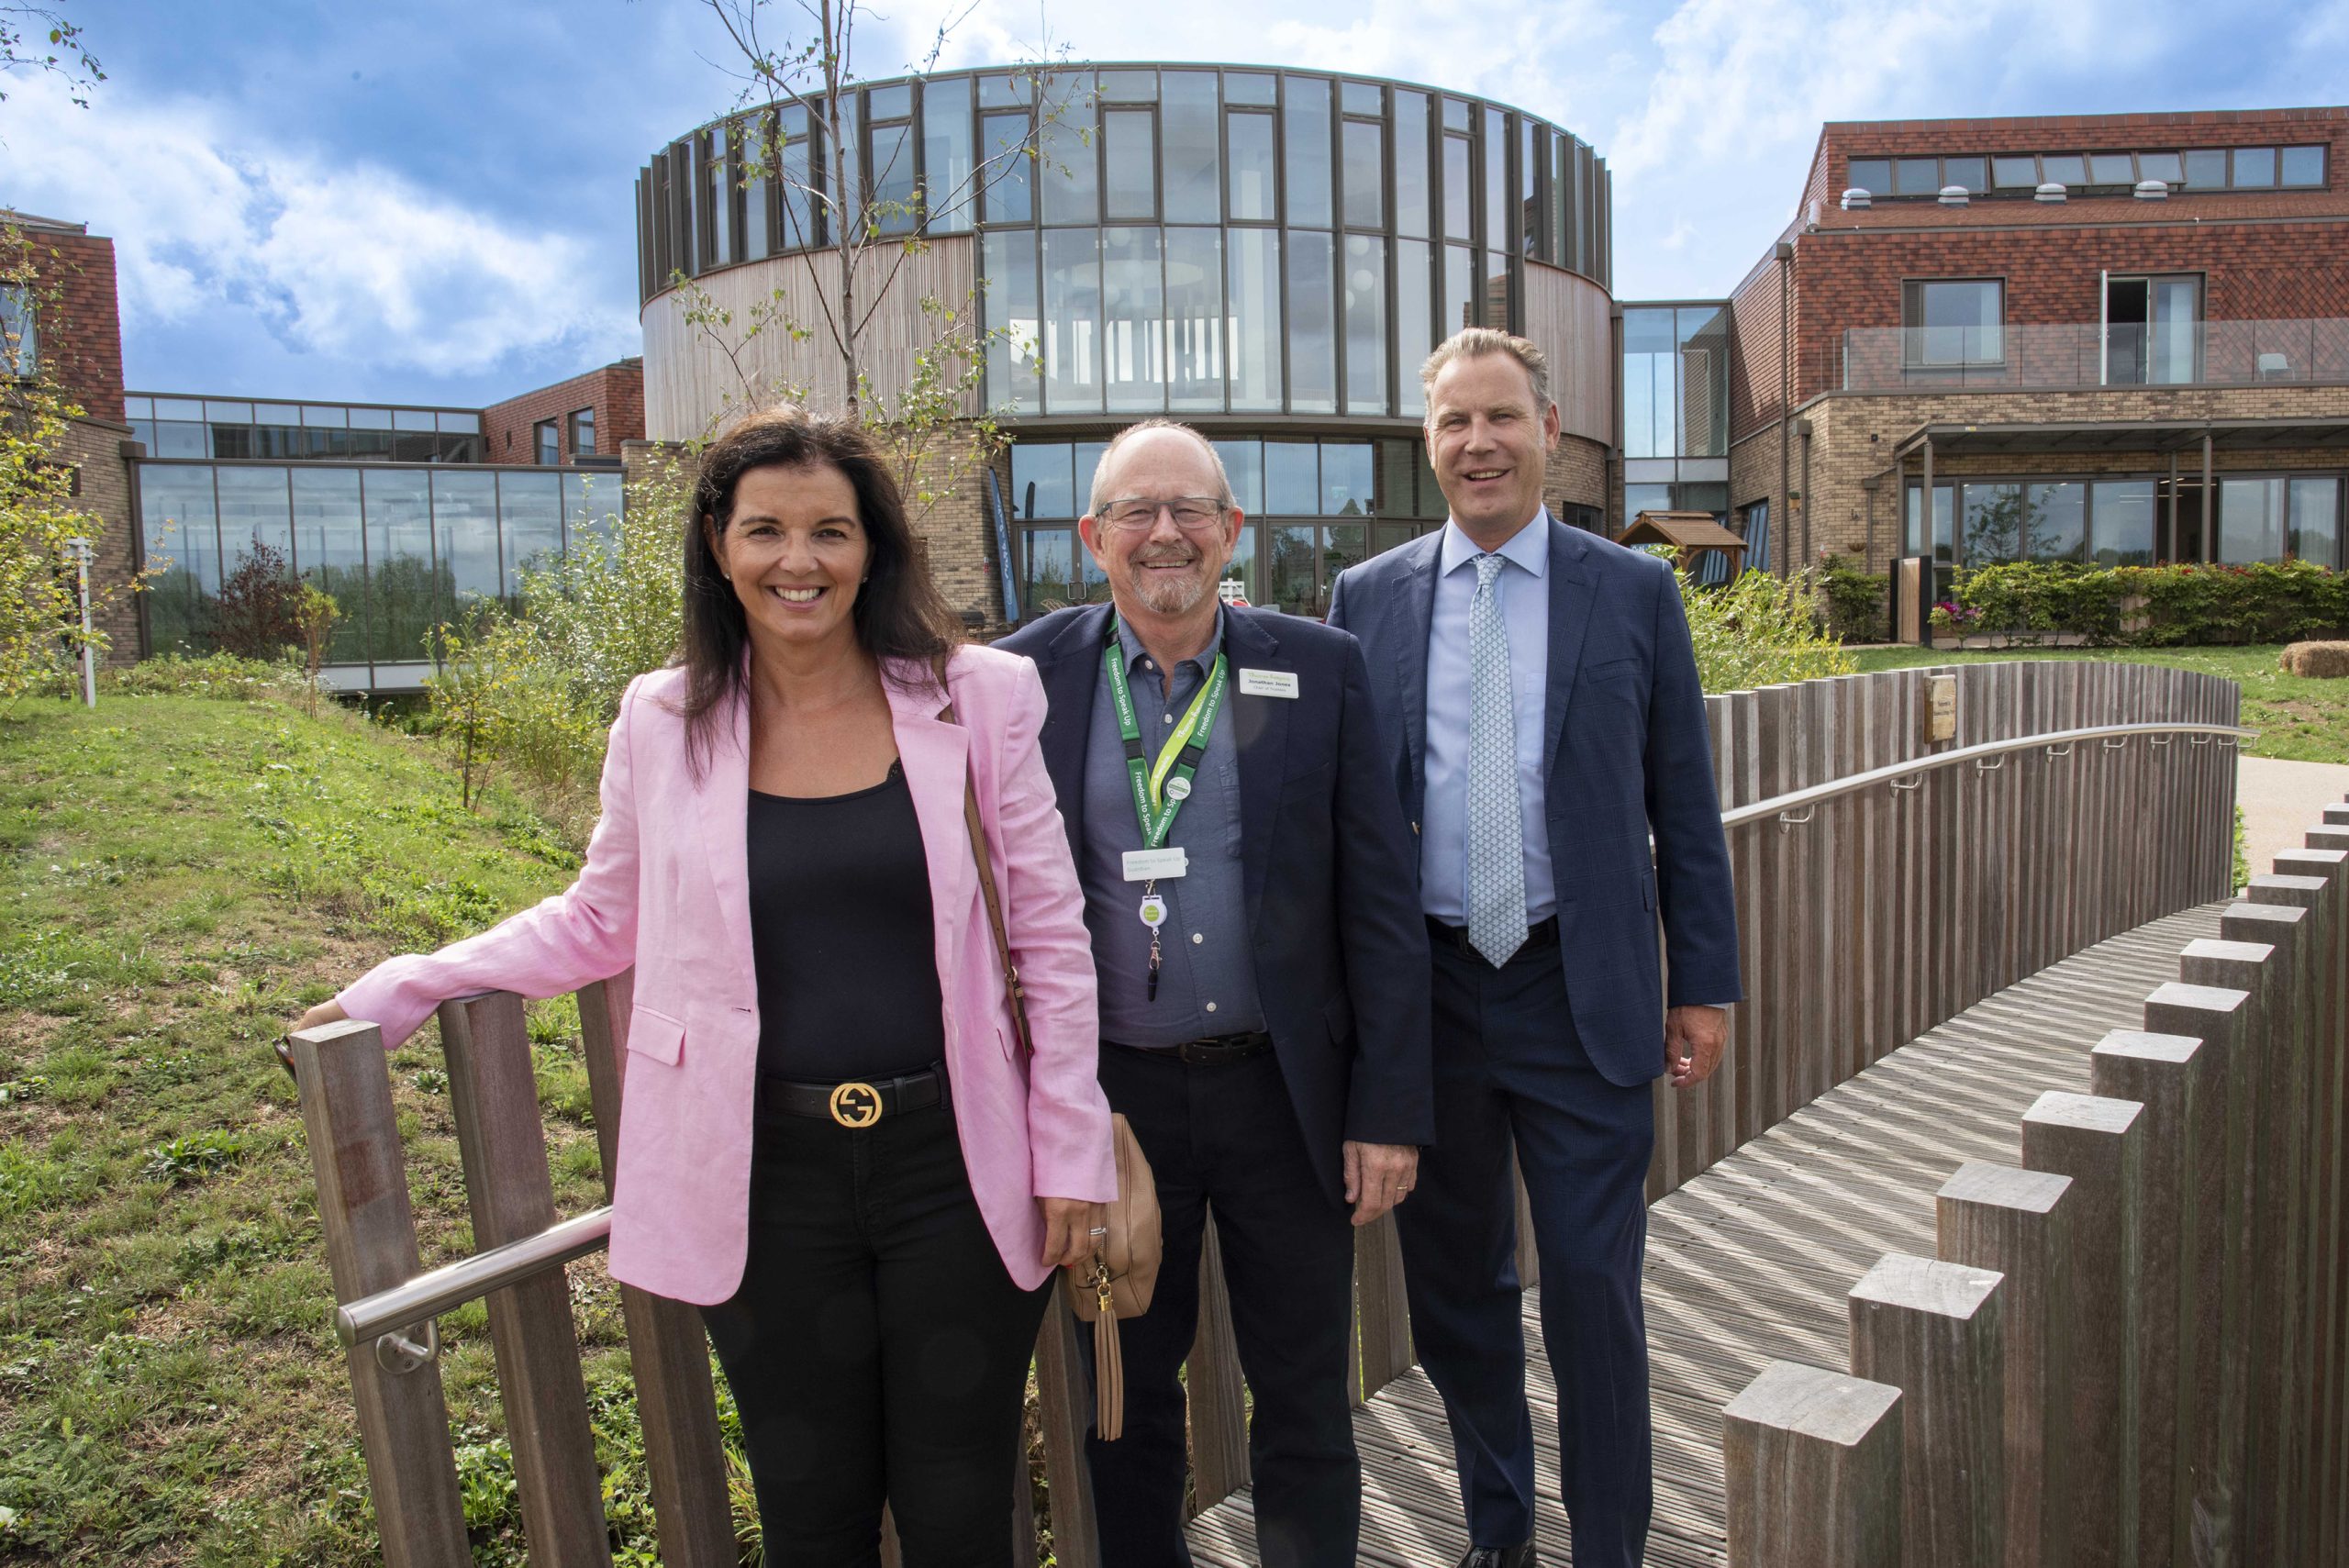 Derna and Neil Grundon  joined Jonathan Jones, Chair of Trustees at Thames Hospice (centre) at a special thank you event for sponsors which supported the building of its new  hospice, situated by Bray Lake in the Royal Borough of Windsor and Maidenhead.